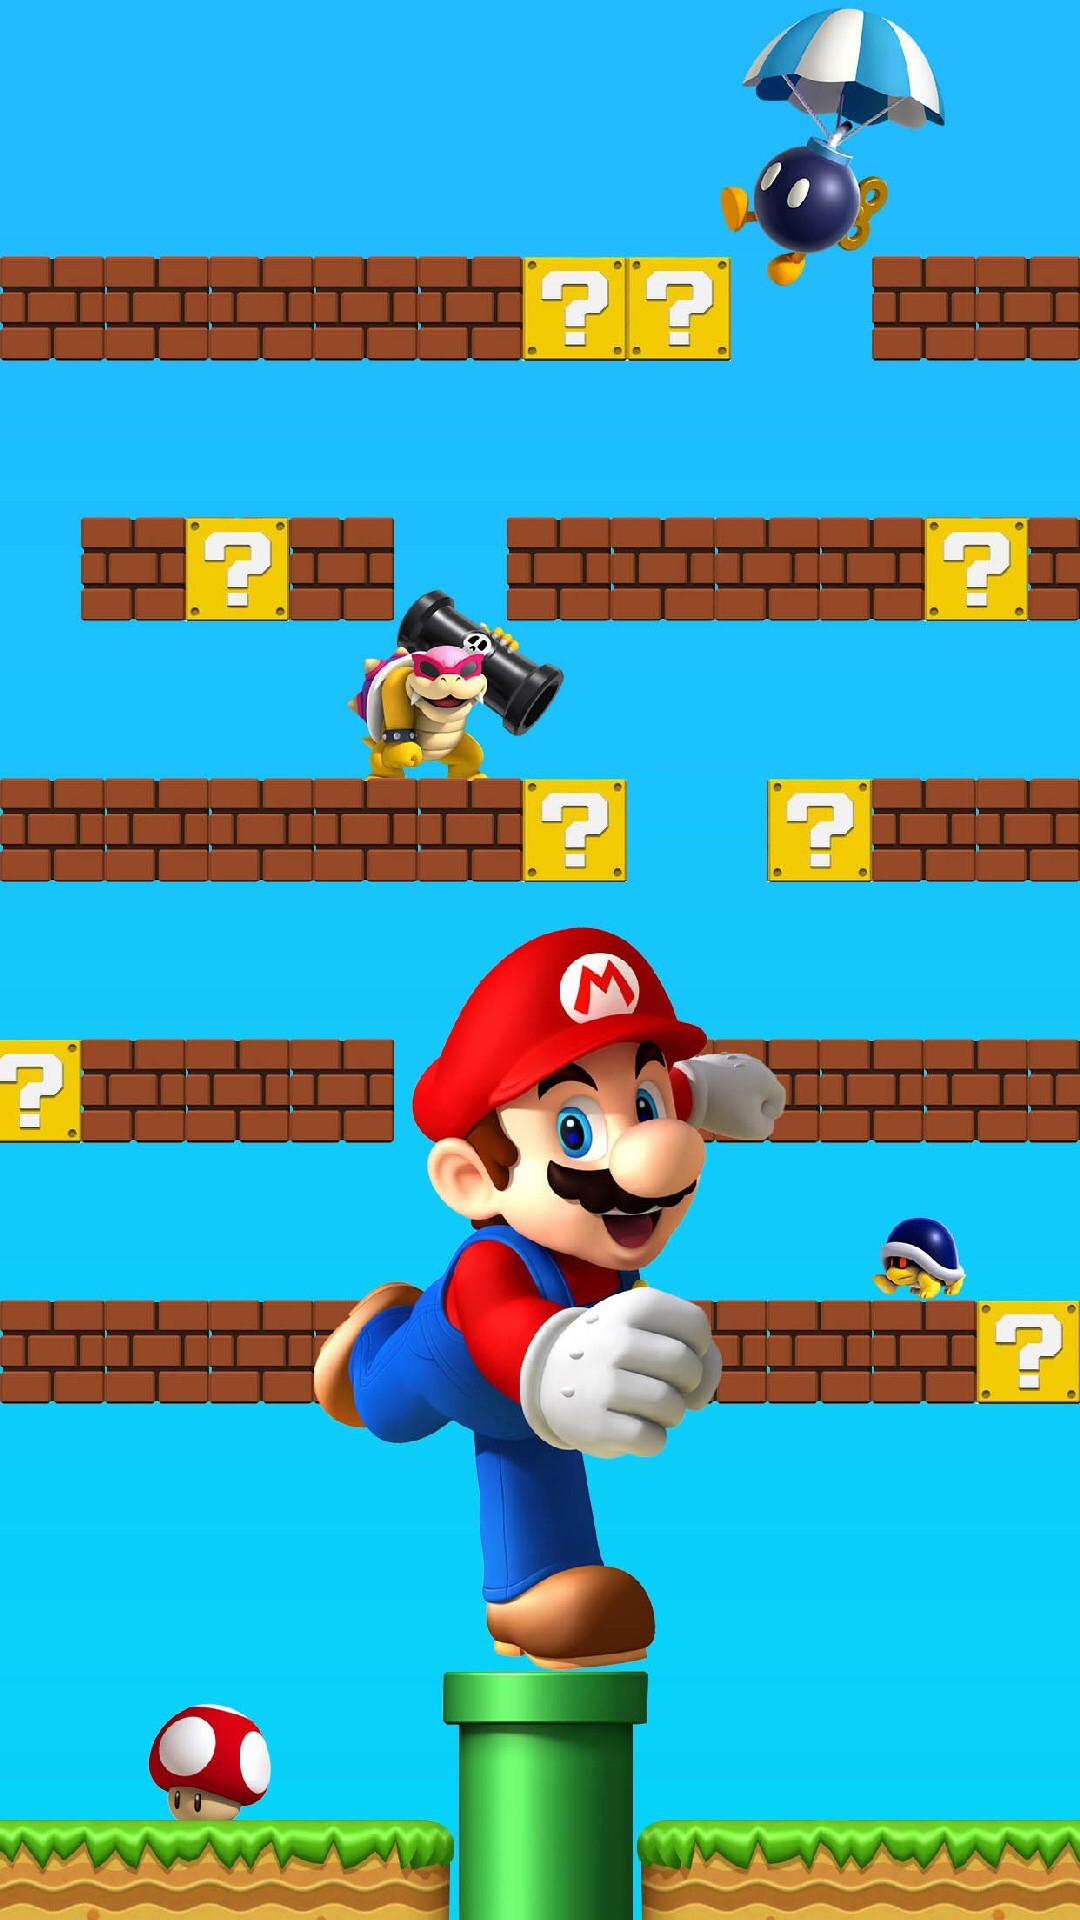 1080x1920 Shelves Super Mario Colorful Awesome Ð¡omputer Graphics. Wallpapers  AndroidCute WallpapersIphone BackgroundsSuper ...